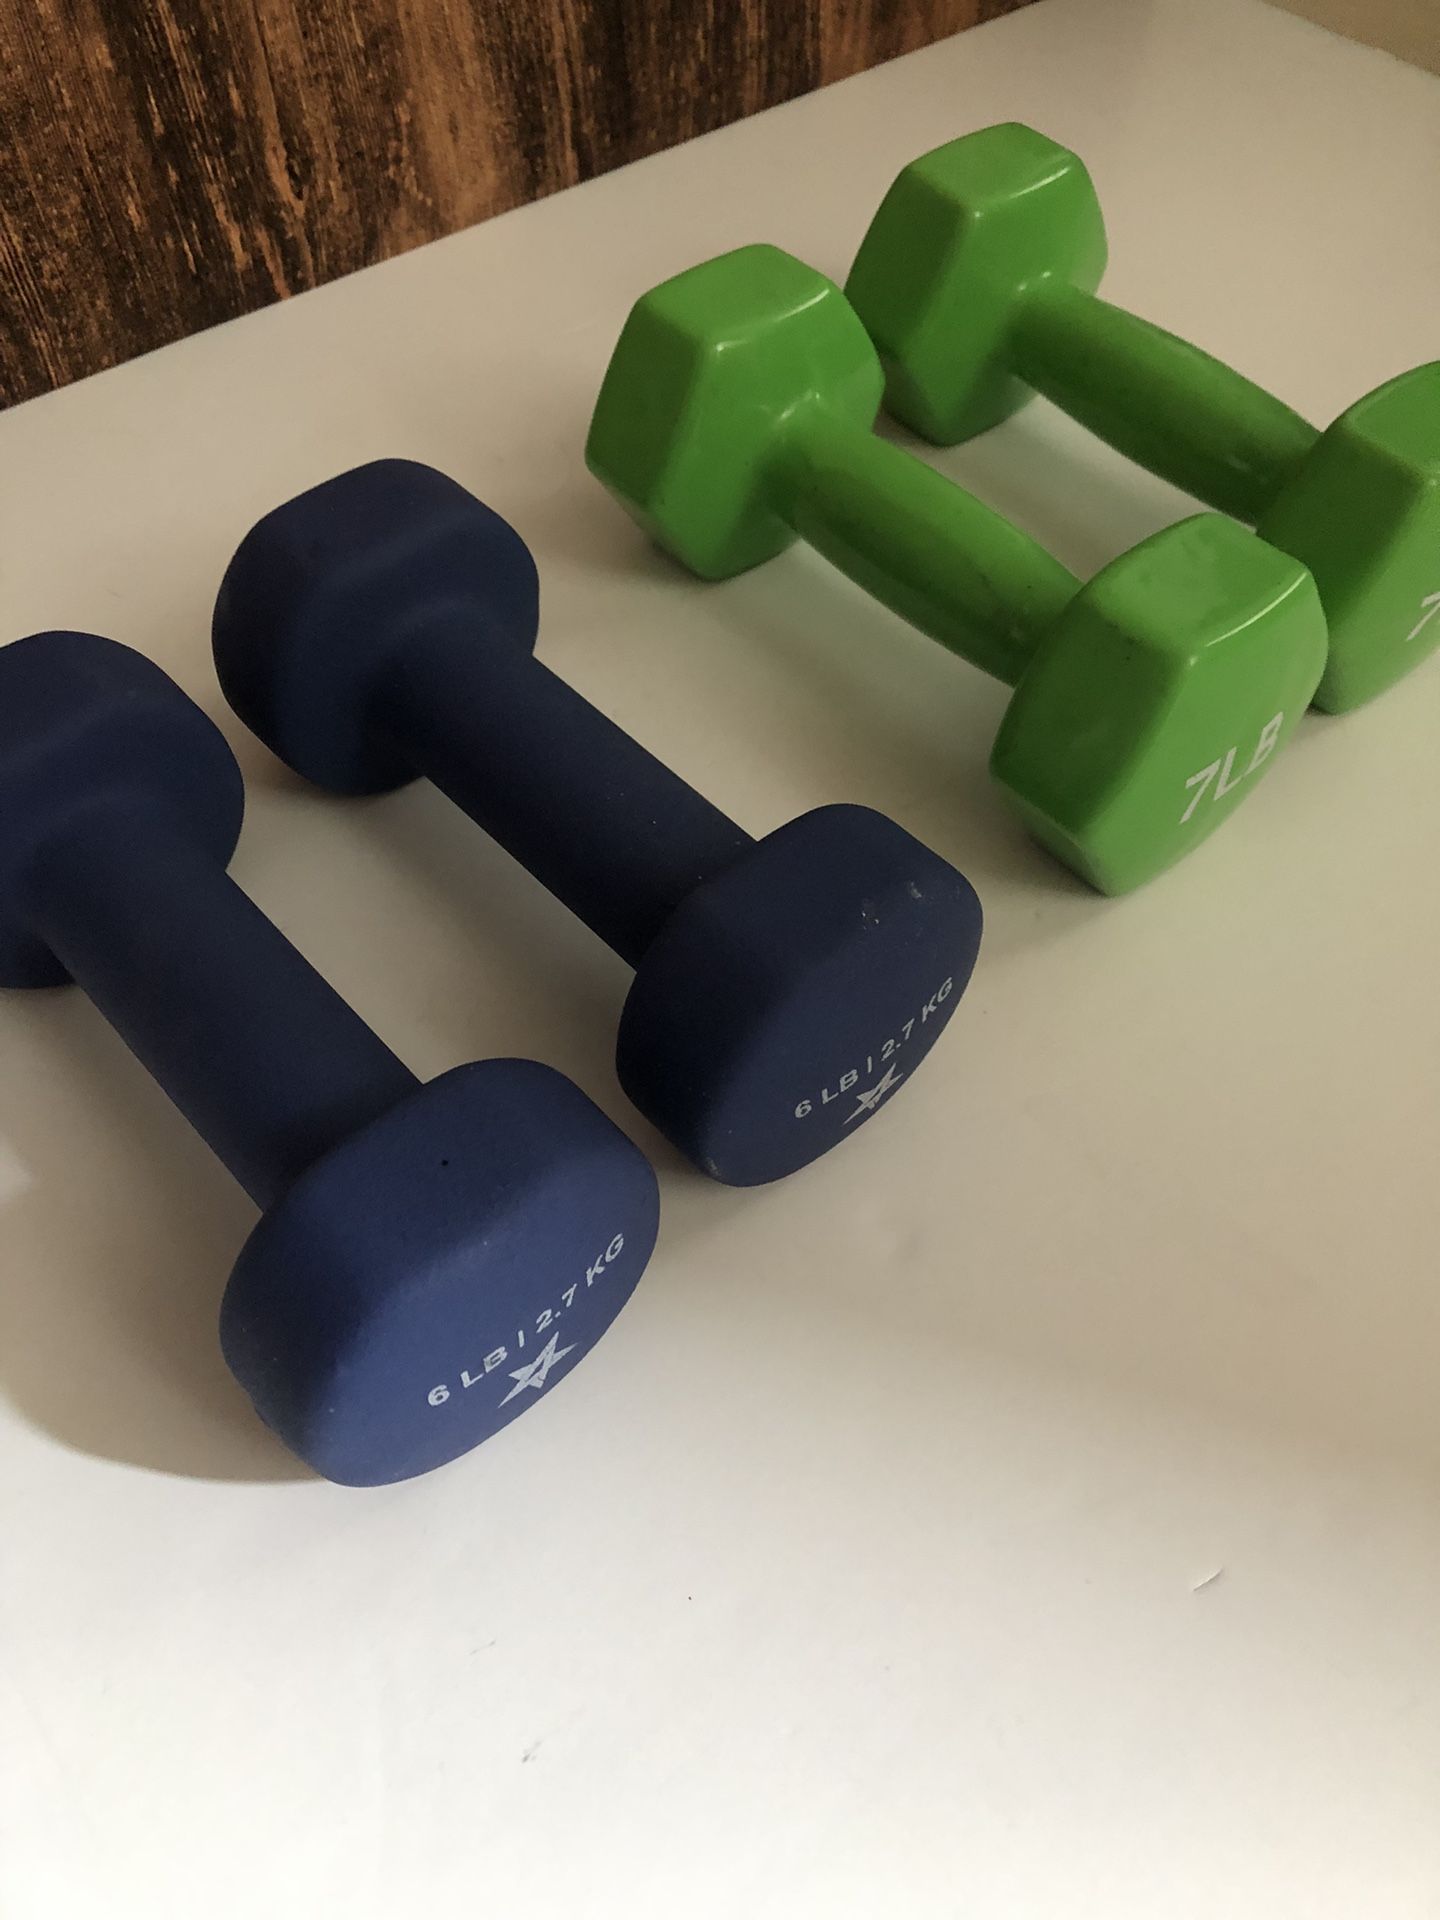 Dumbbells Vinyl/Rubber Coated Set Of 6 Lbs. and 7 Lbs. Total 26 Lbs. Workout/Home Gym